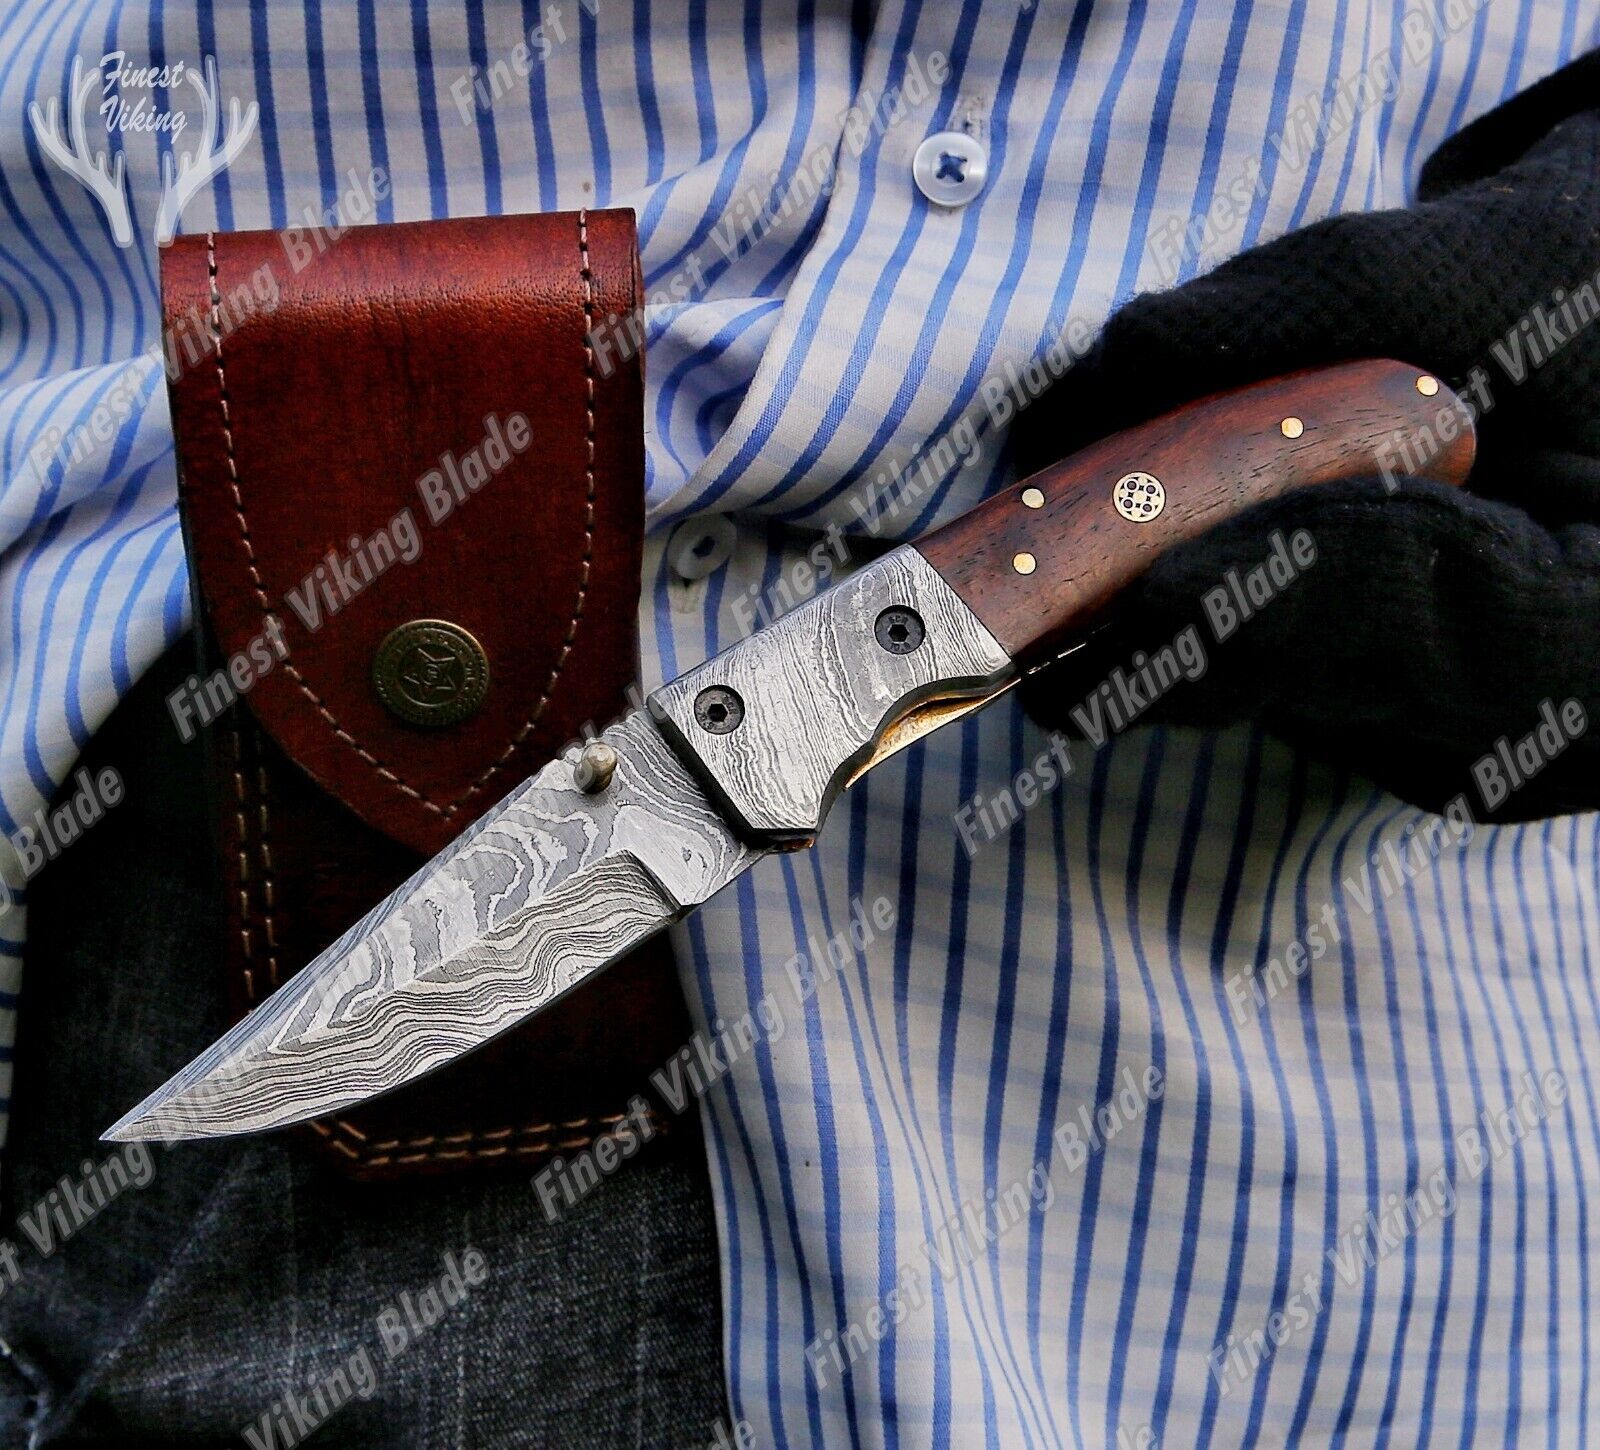 HANDMADE UNIQE GIFT Damascus Folding knife, Hunting/Camping Best Gifts For Him